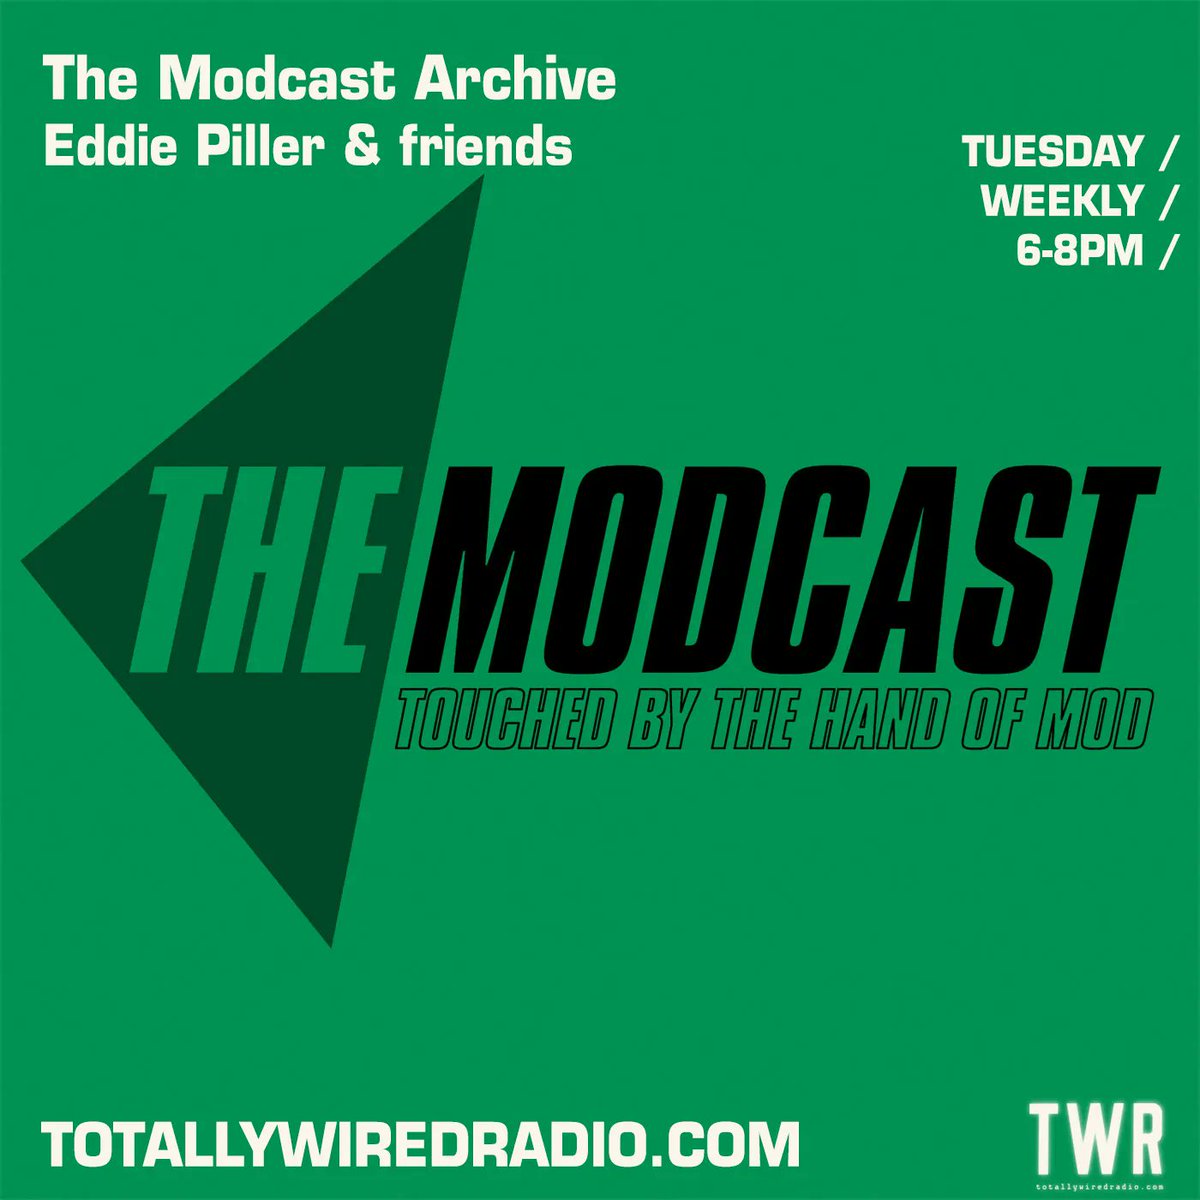 The Modcast Archive #replay Eddie Piller with March of the Modcasters Playlist #special #startingsoon on #TotallyWiredRadio Listen @ bit.ly/towira
-
#MusicIsLife #London
-
#soul #funk #jazz #beats #bass #house #nujazz #disco #ska #reggae #mod #punk #Interview #Podcast